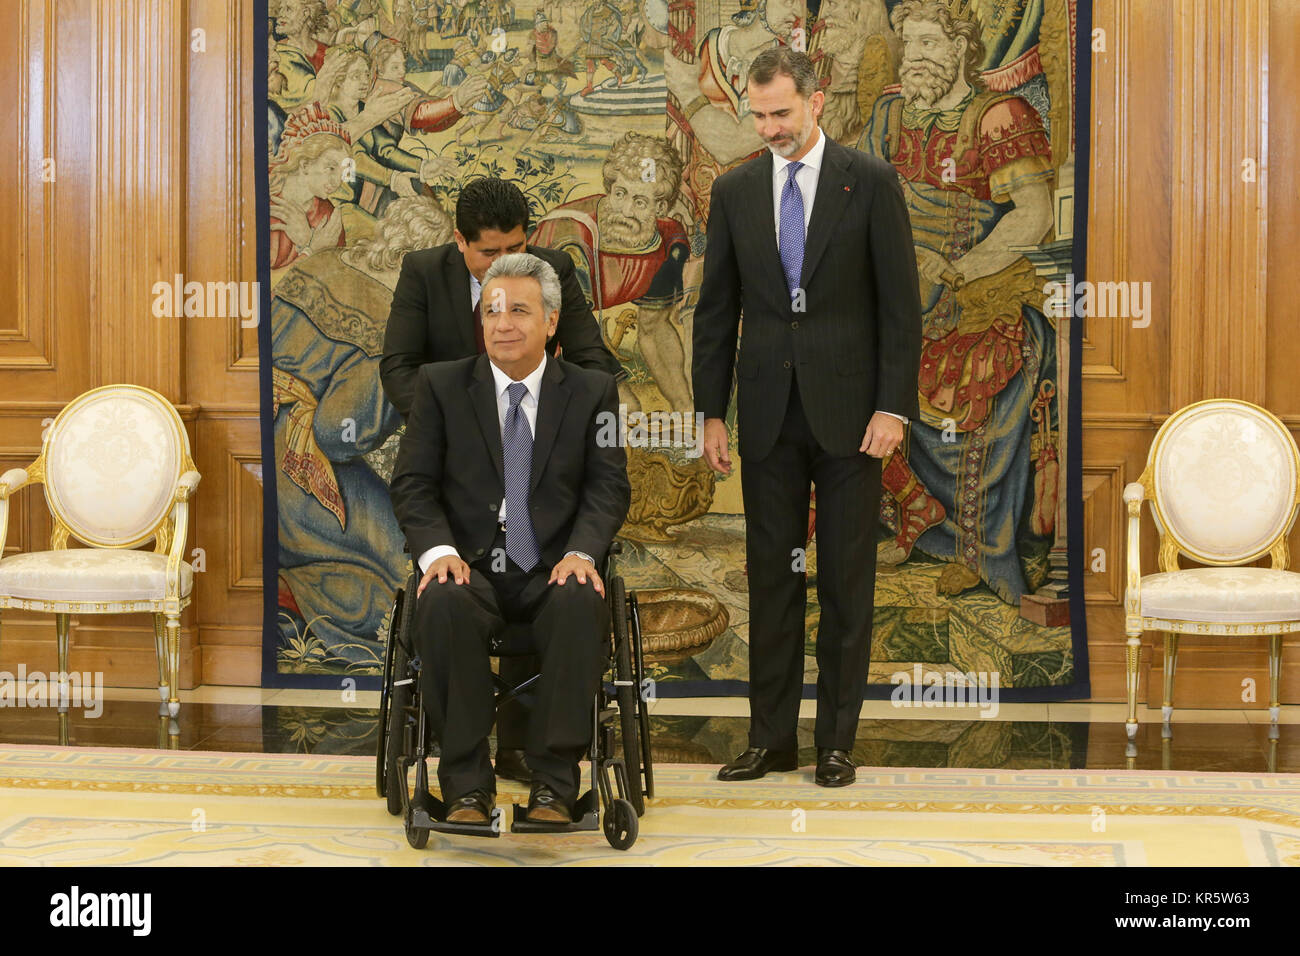 Madrid, Spain. 18th December, 2017. Spanish King Felipe VI and the president of Ecuador Lenin Moreno during the official visit in Madrid, on Monday 18th December 2017. Credit: Gtres Información más Comuniación on line, S.L./Alamy Live News Stock Photo